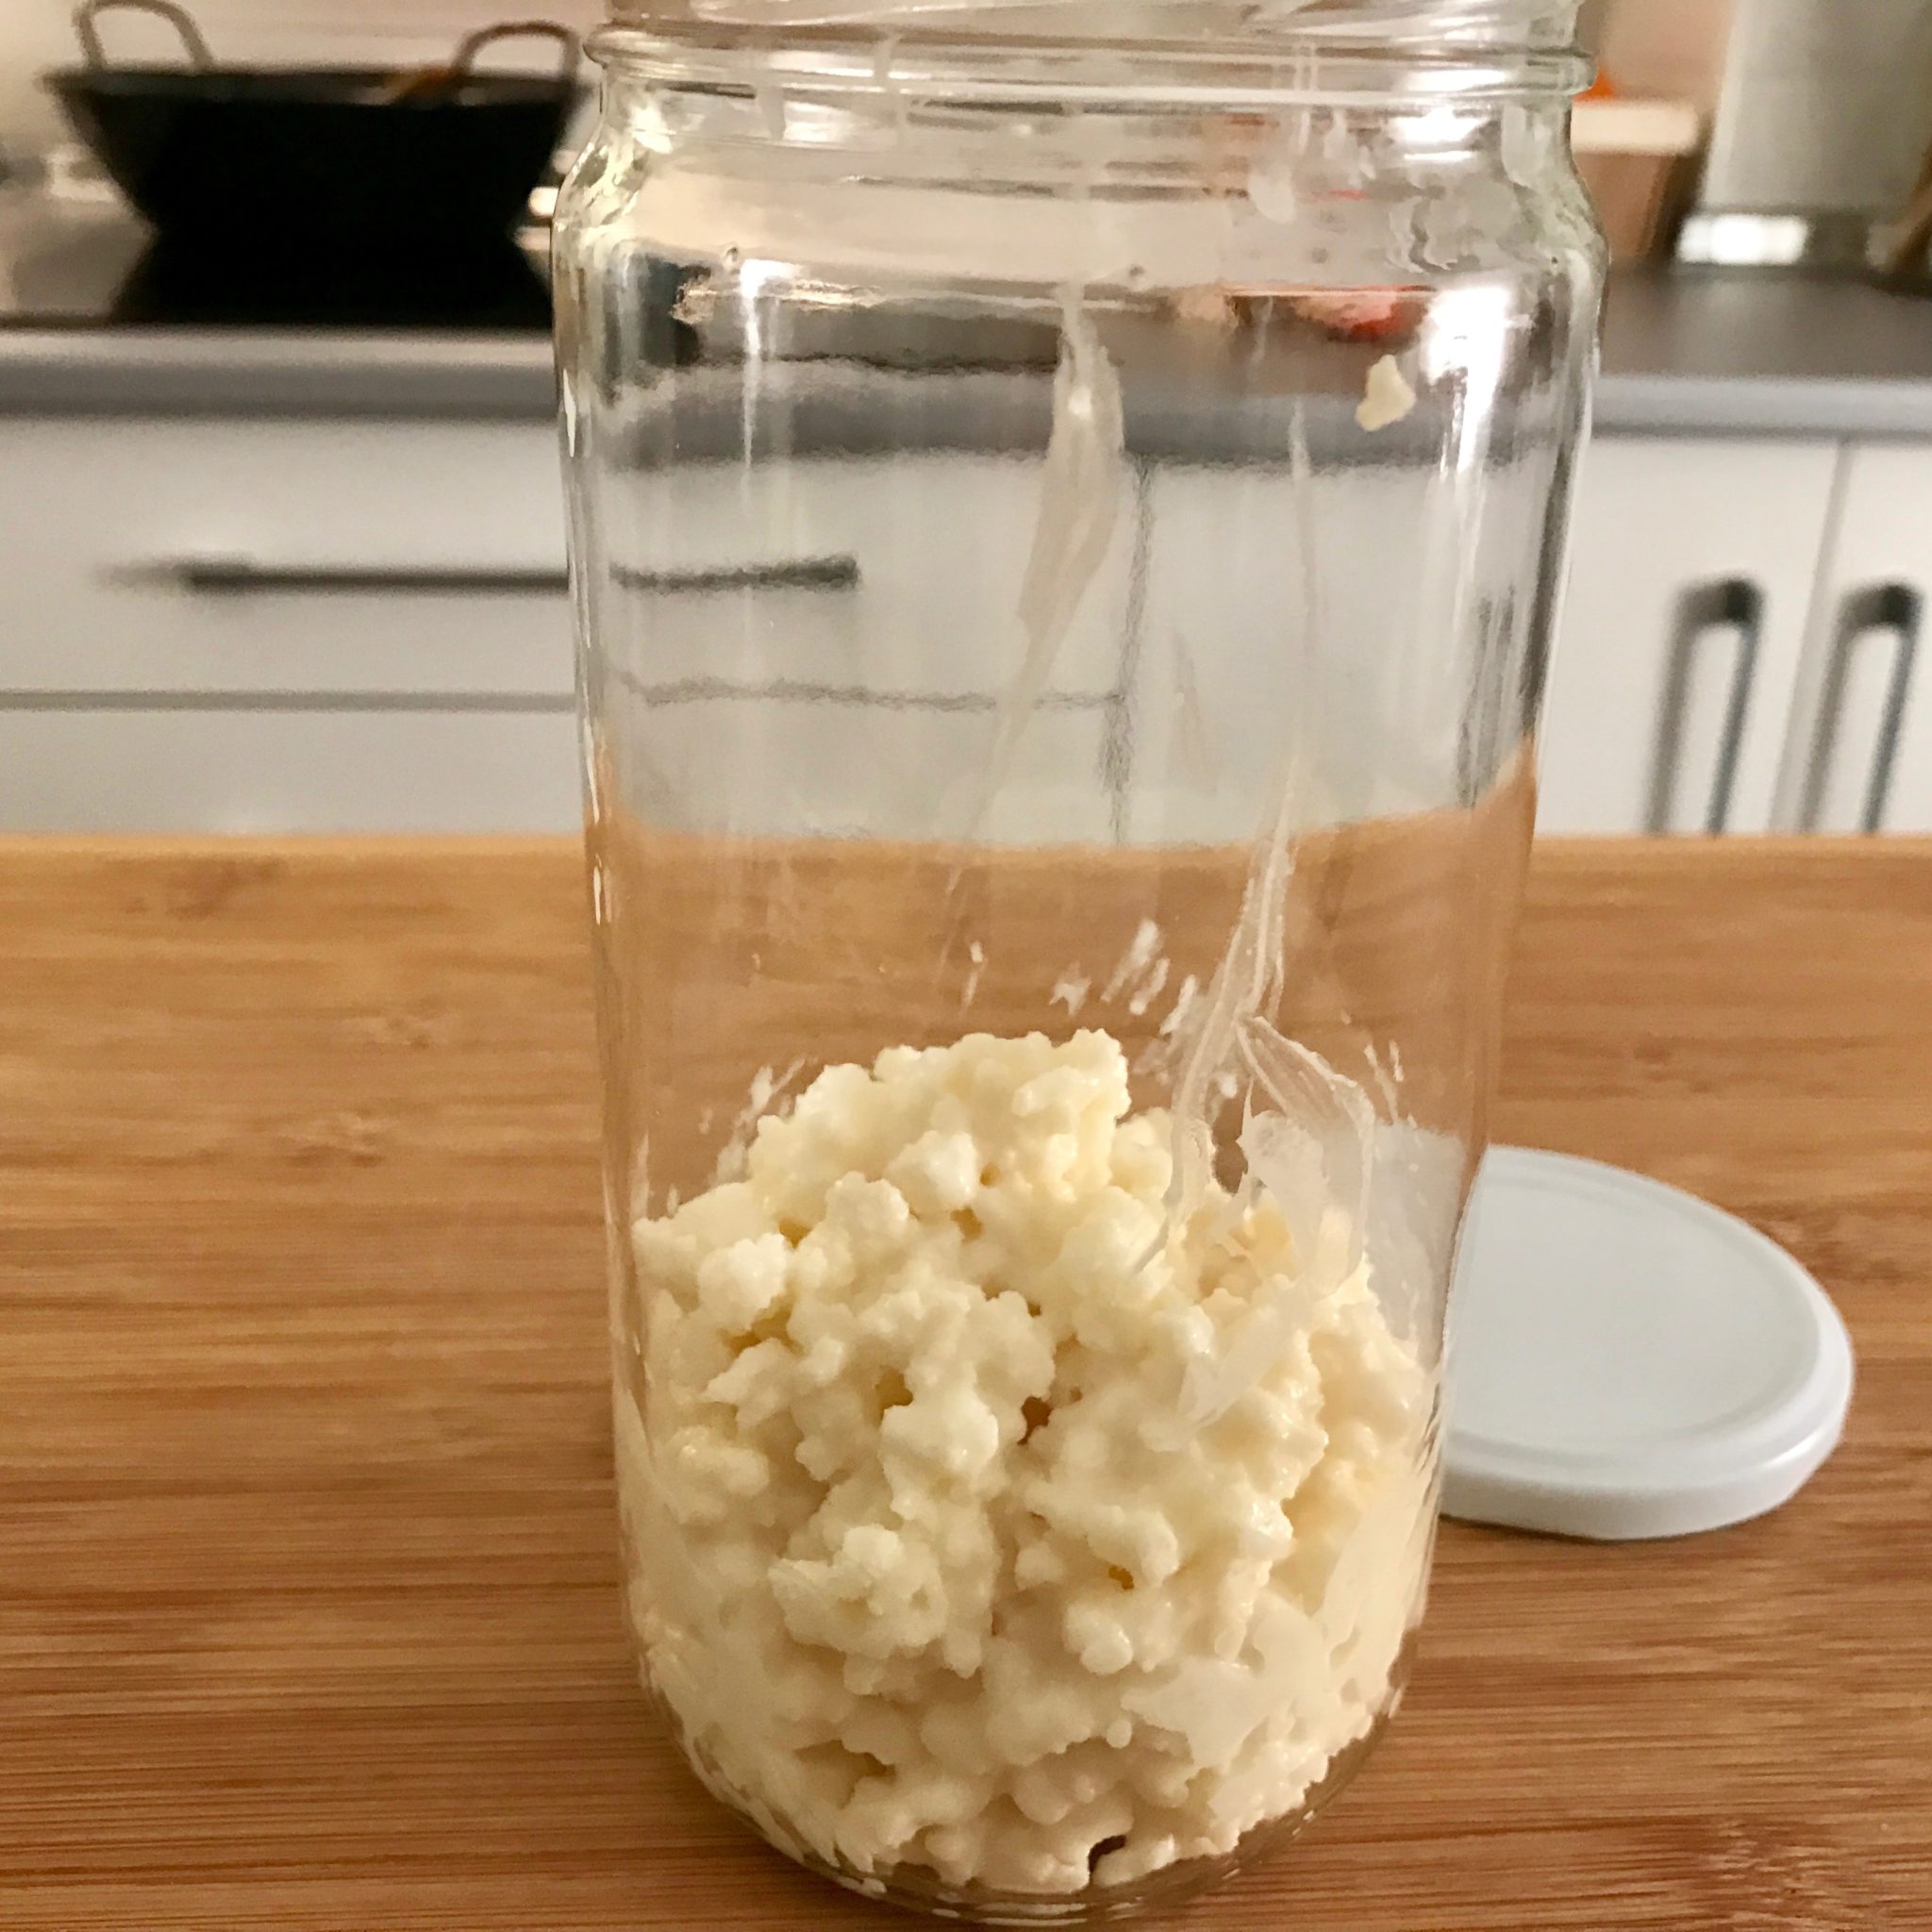 How to make Milk Kefir: A probiotic rich drink made easy